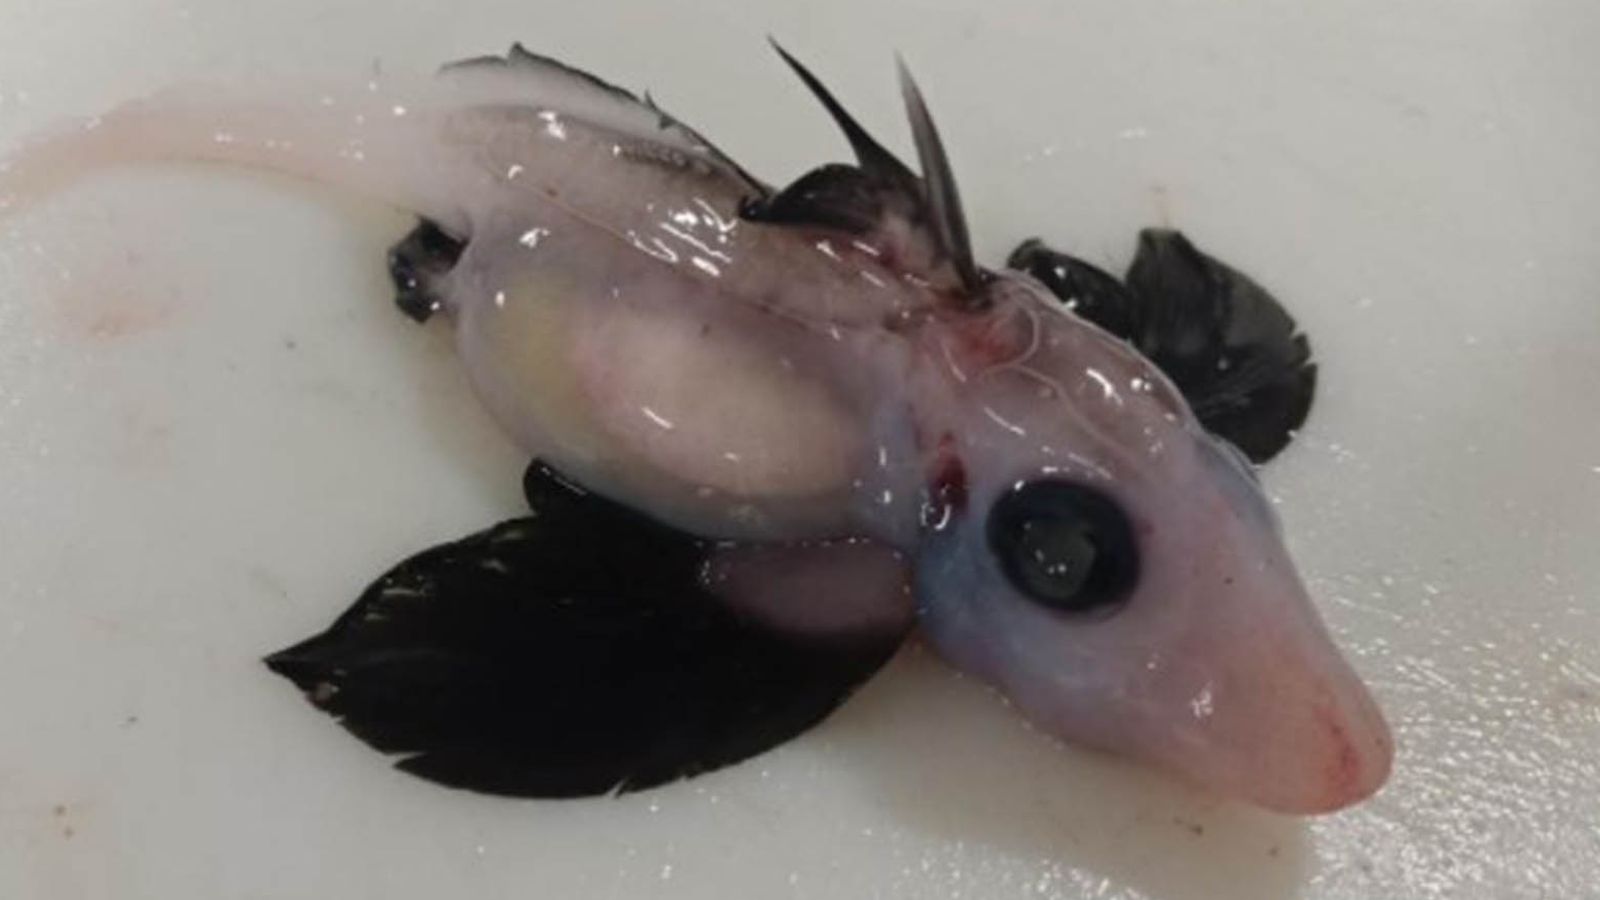 New Zealand: Baby ghost shark discovered off South Island in 'very rare find'